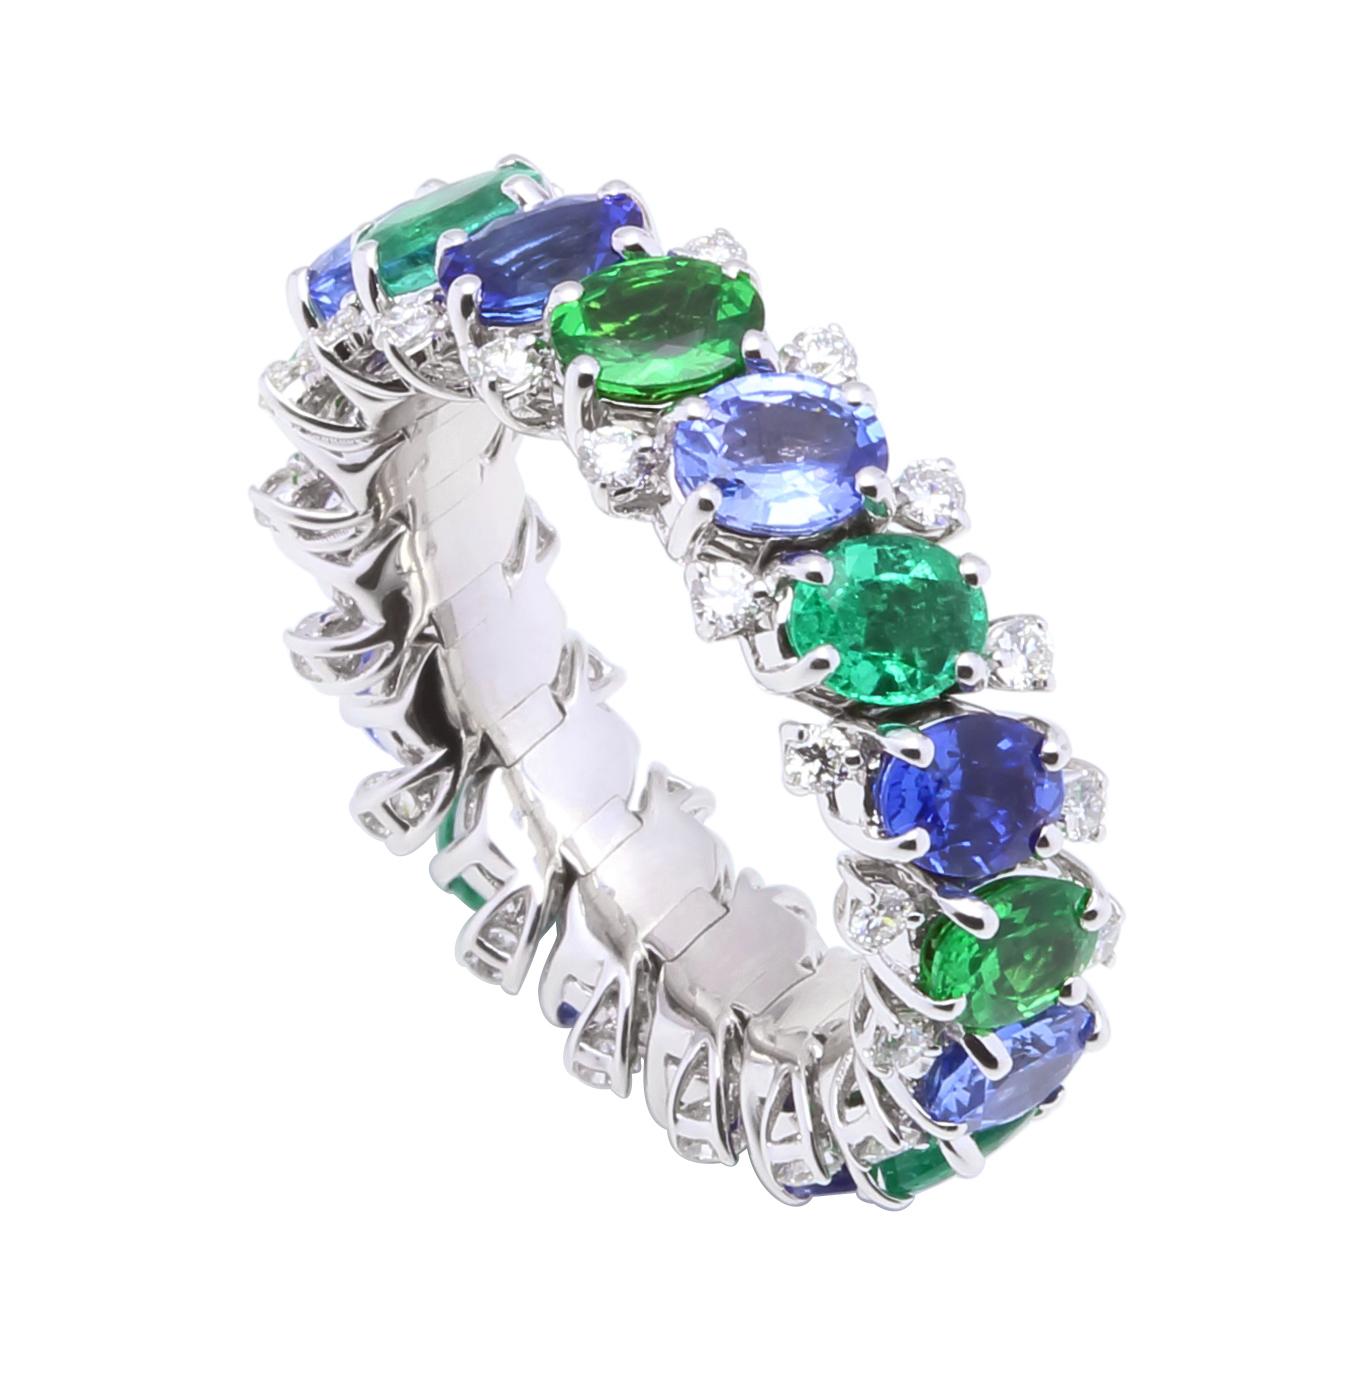 Diamond Emerald Sapphire Tsavorite Flexible Unique Eternity Band White Gold Ring

The multicolor Designs inspired by tartan colours (e.g. Chatham, Royal Stewart Tartan). Originally inspired by Shades of tartan, colour gemstones are prevalently used